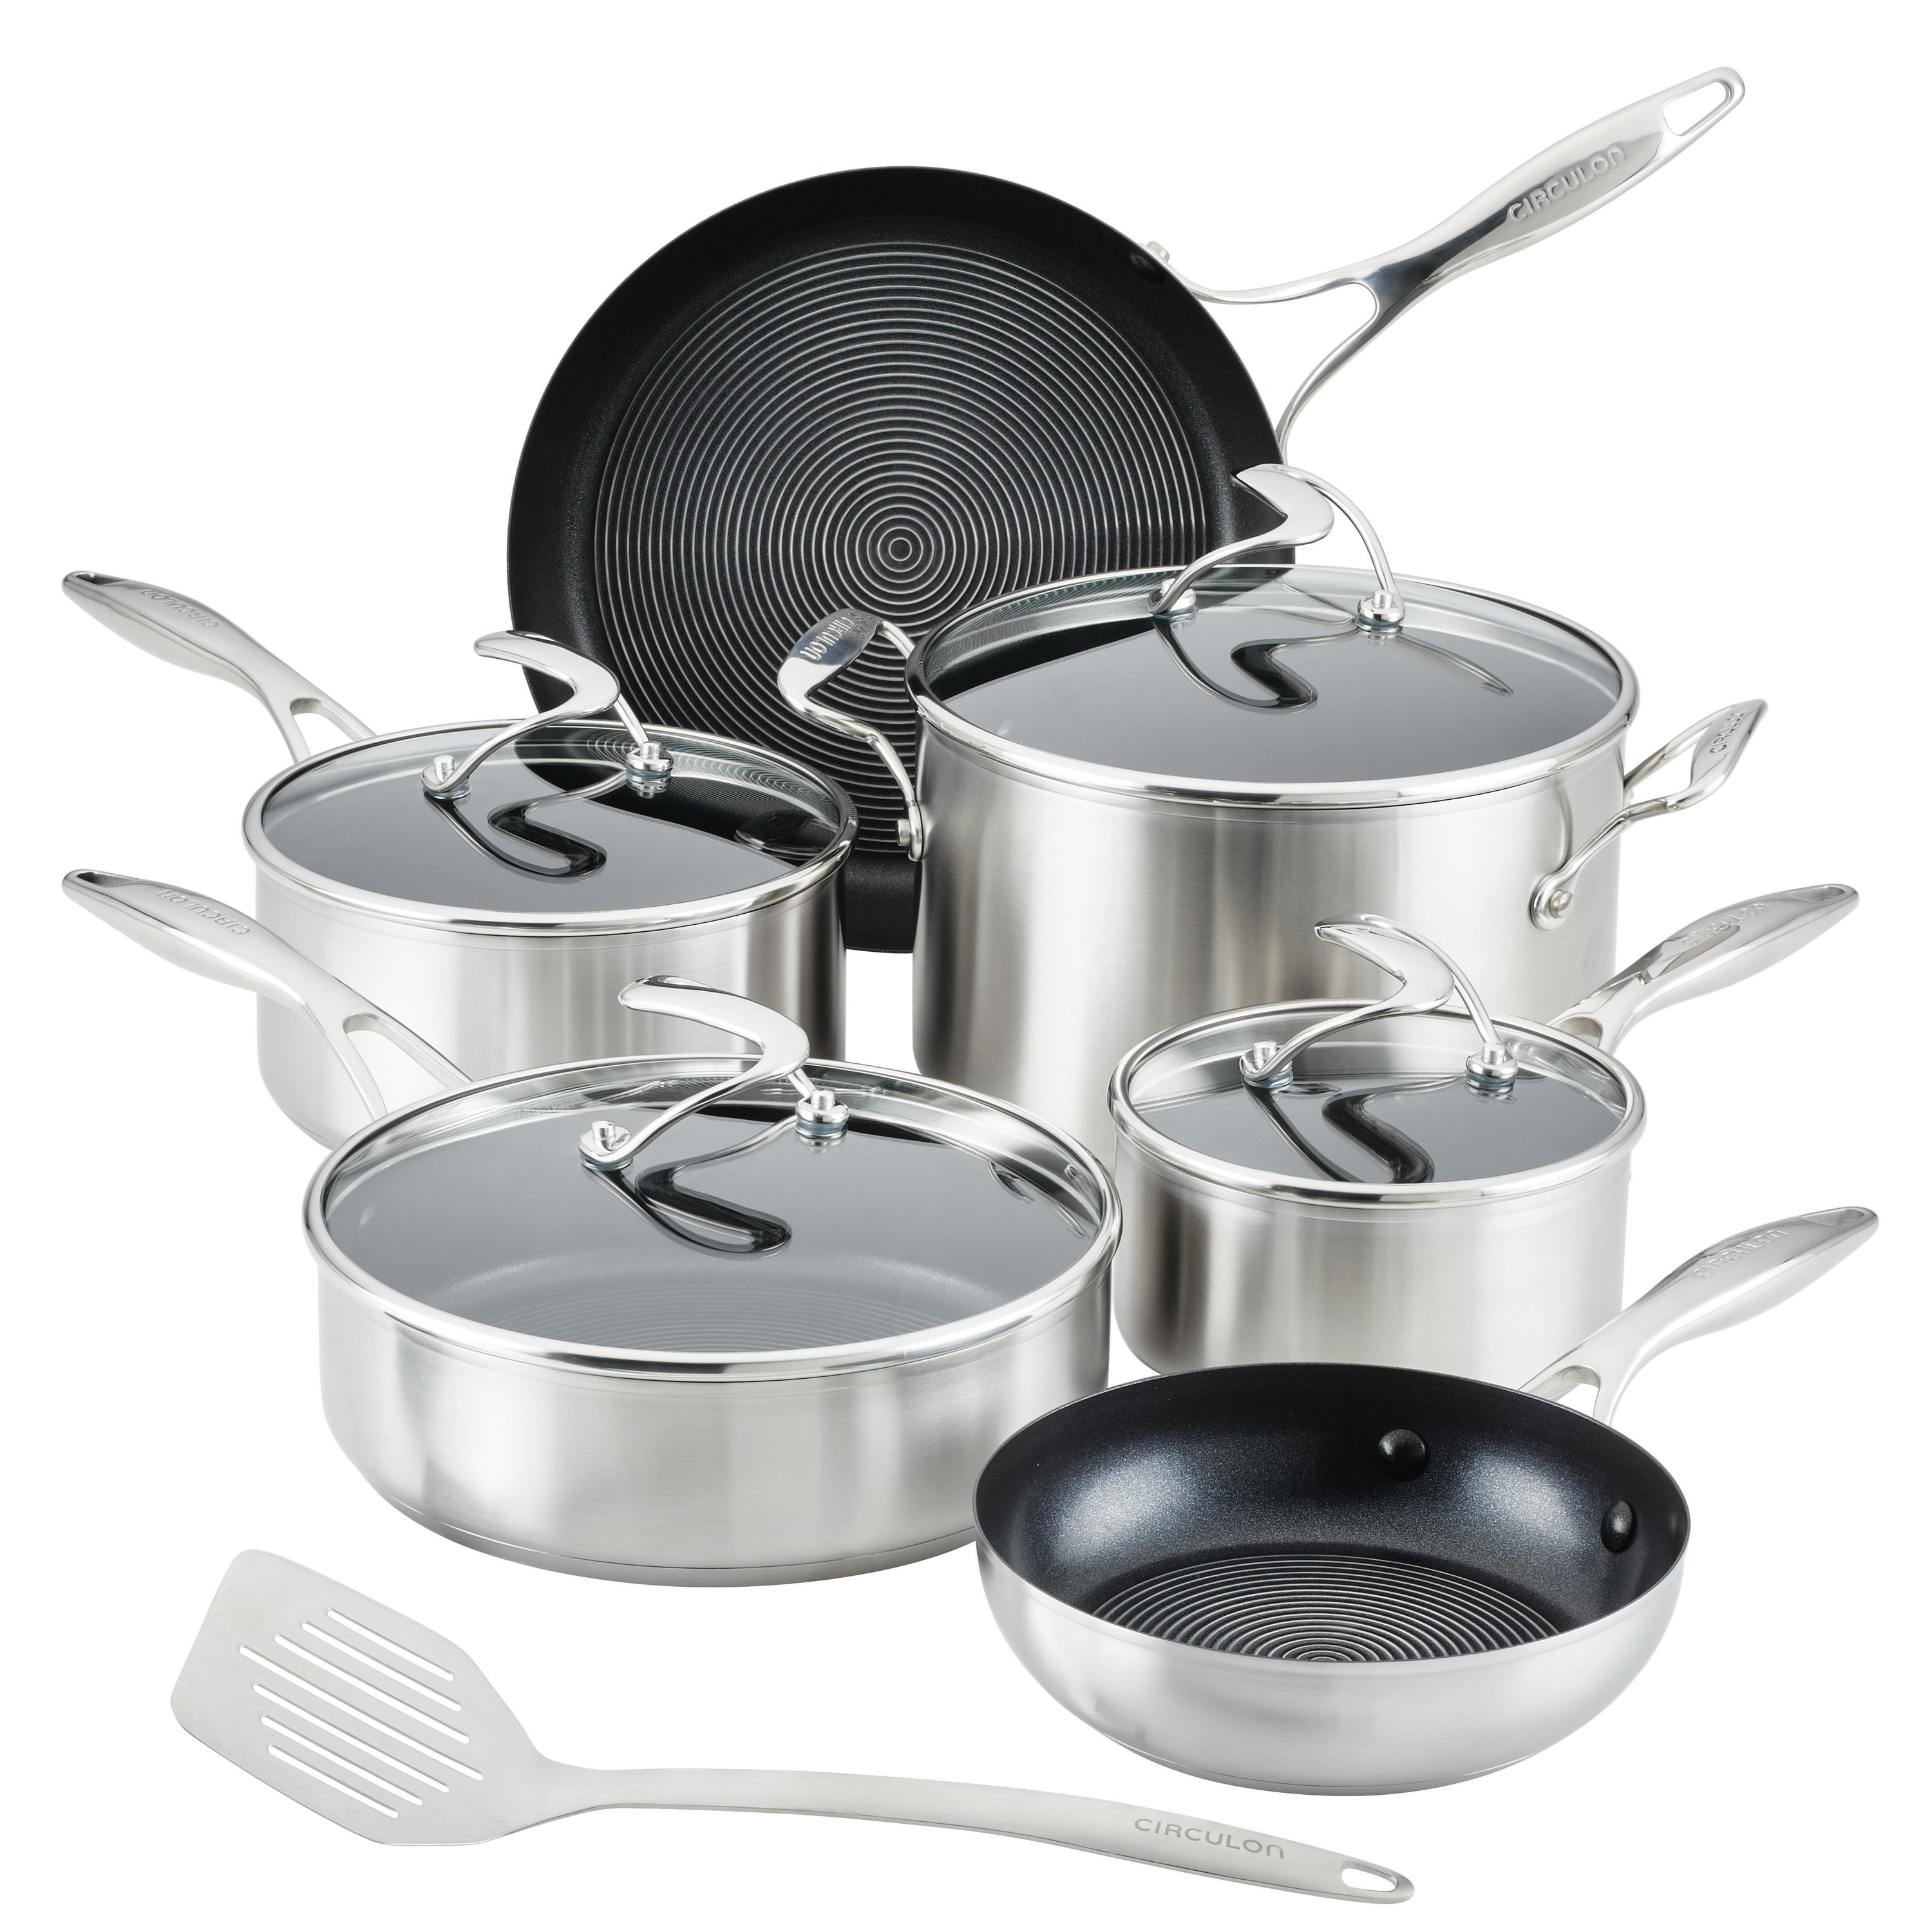 Circulon Nonstick 15-in Stainless Steel Cookware Set with Lid